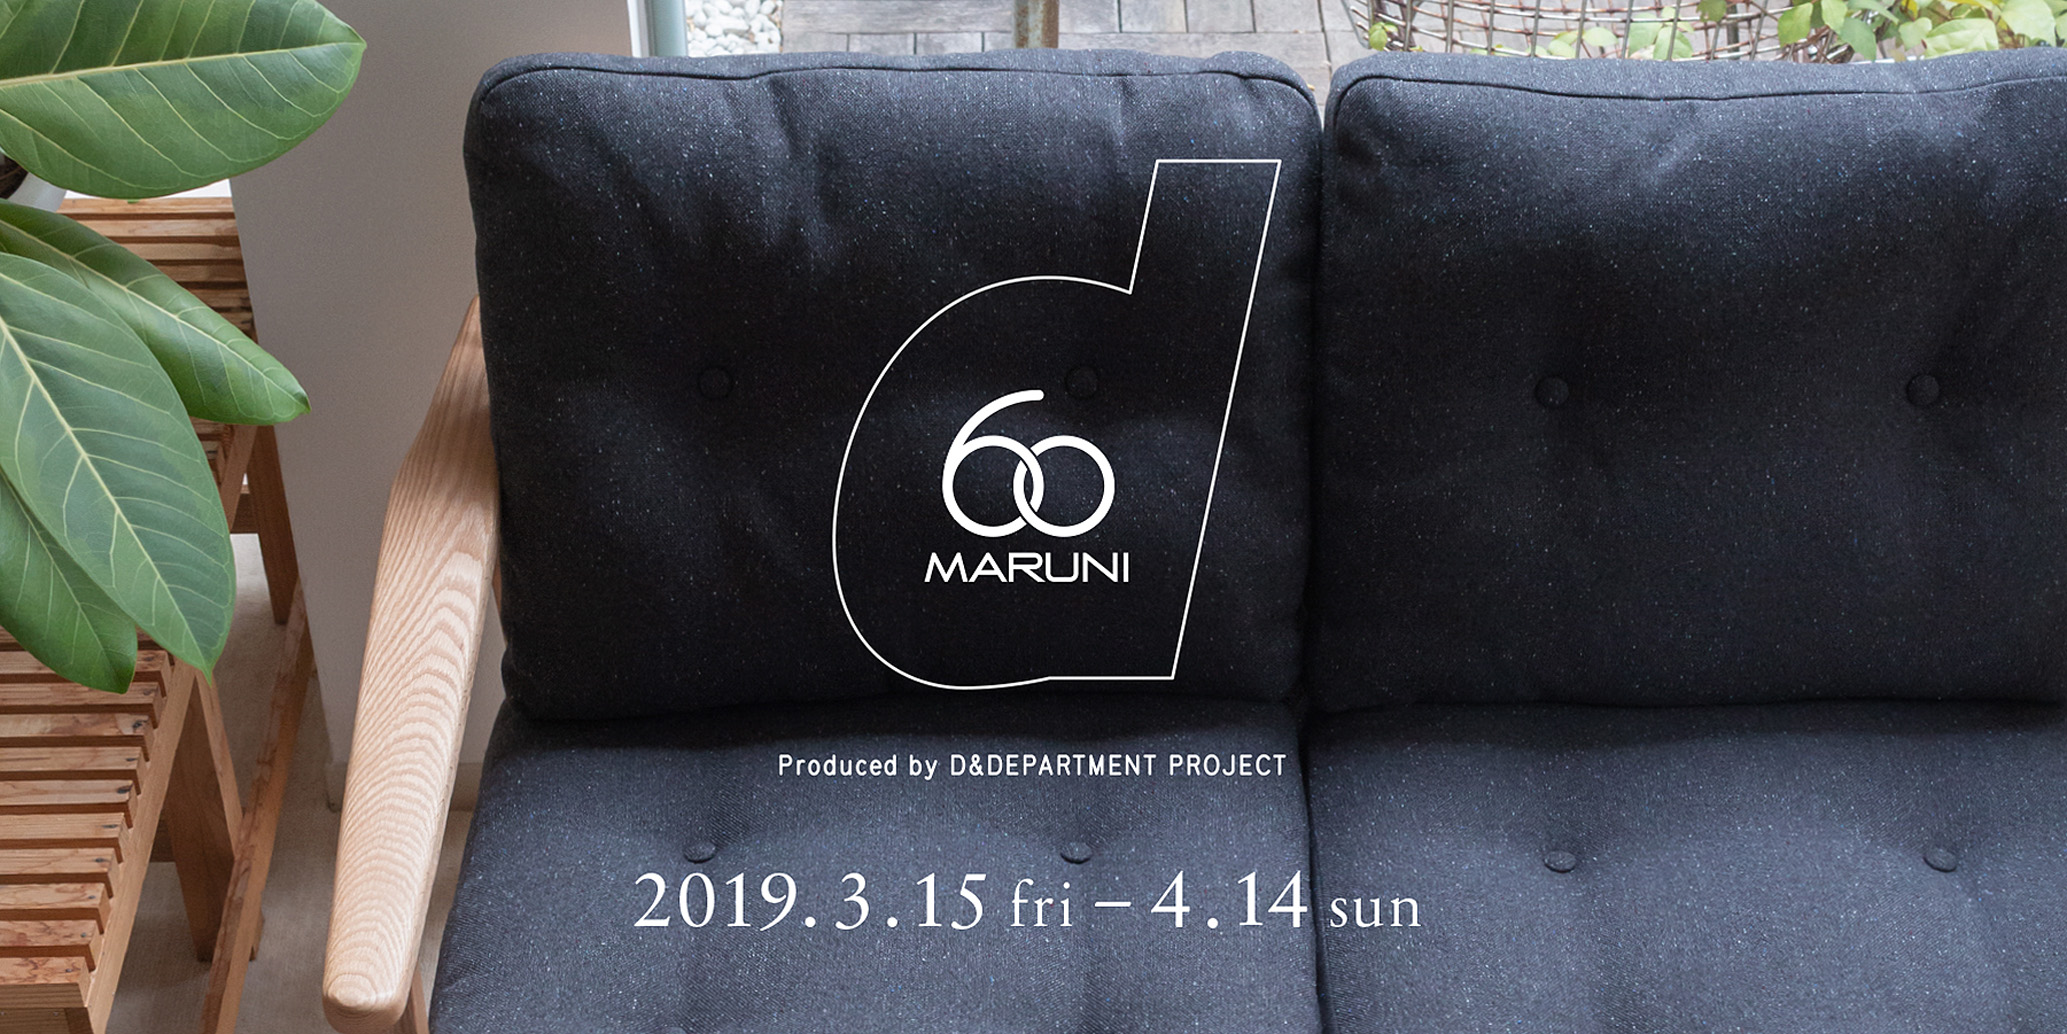 MARUNI60 STORE Produced by DDEPARTMENT PROJECT 開催 3月15日(金)～ 4月14日(日) - マルニ木工  公式サイト - Maruni